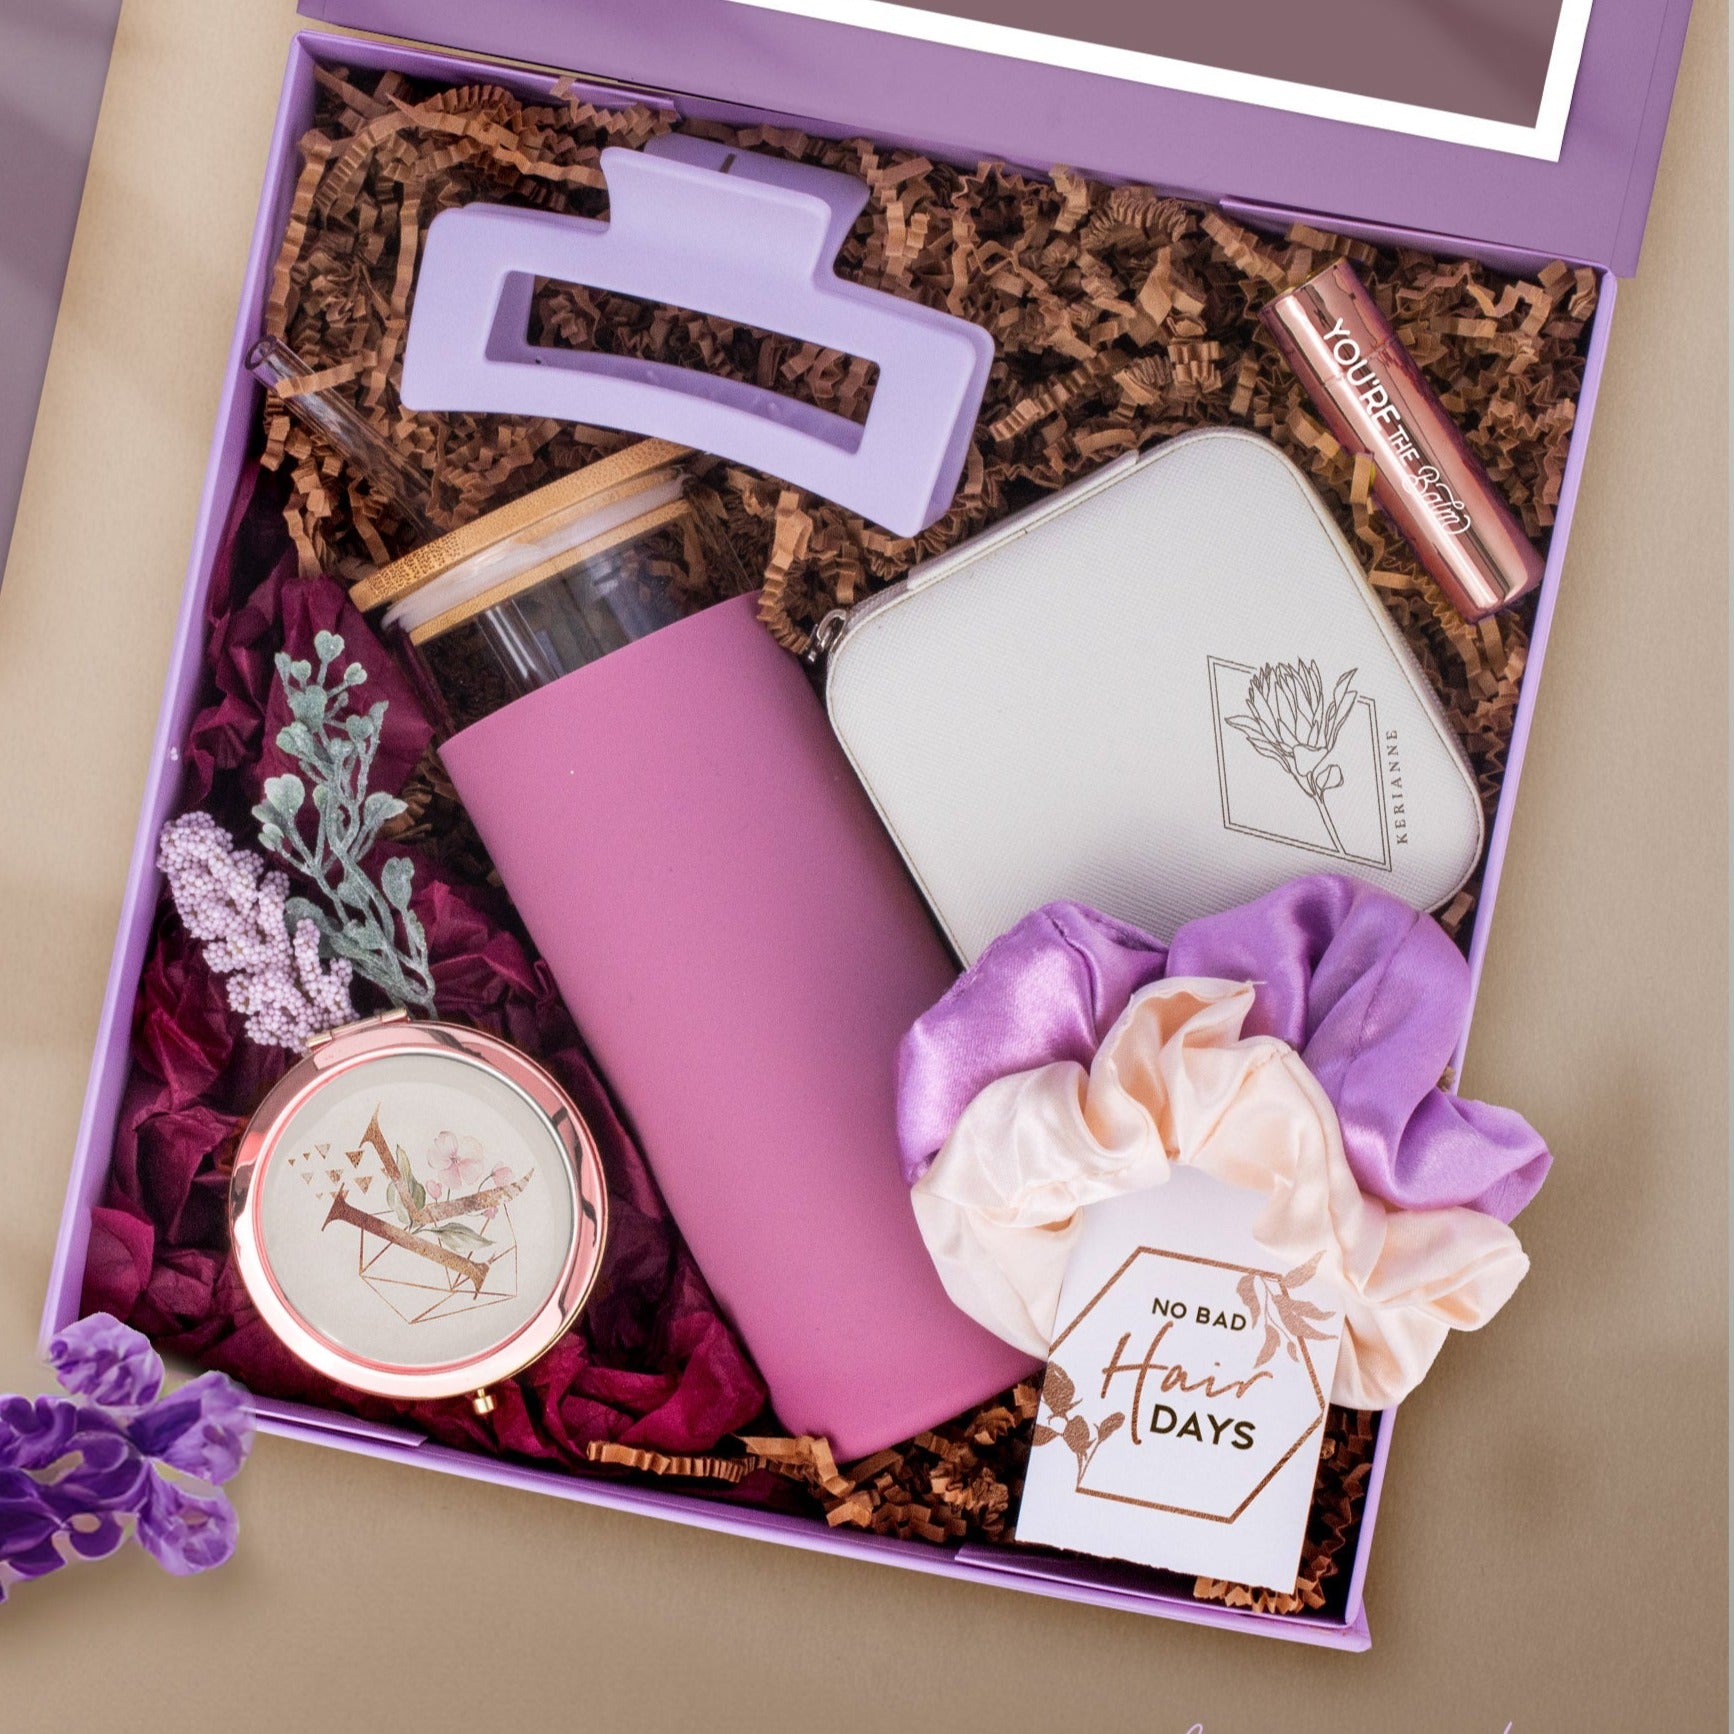 The Everyday Glam Style Gift Set